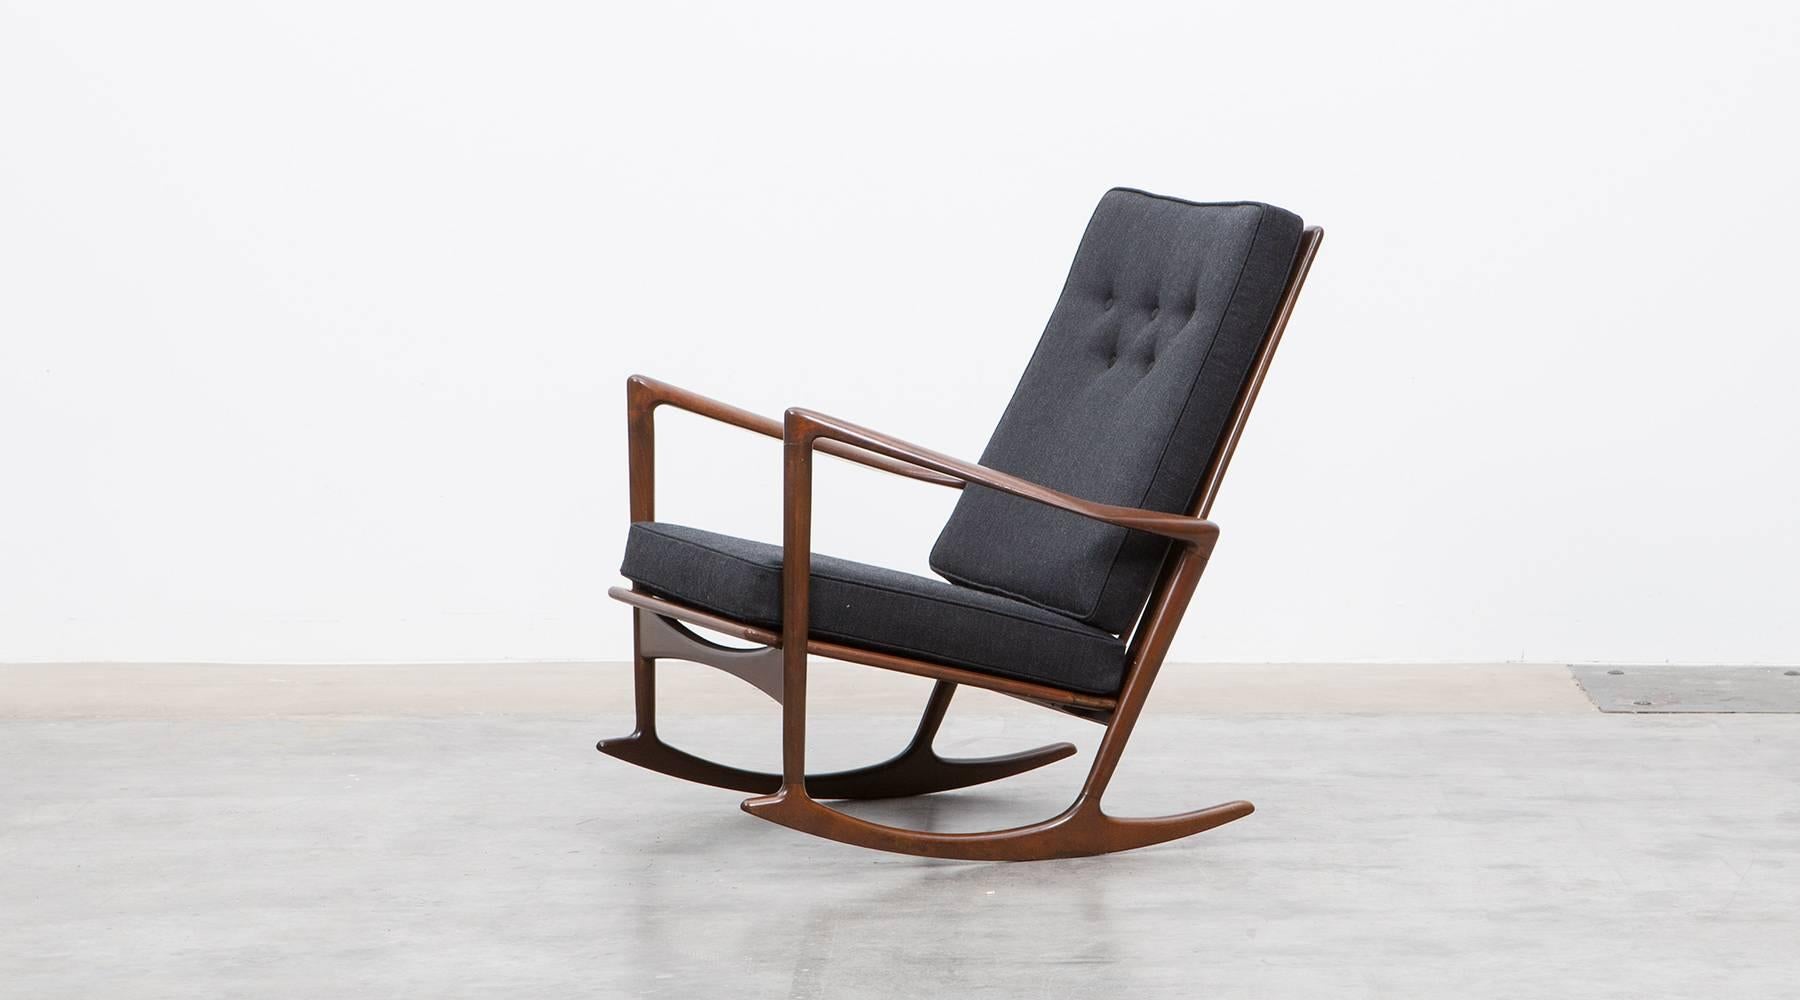 Rocking chair with brown walnut frame designed by famous Ib Kofod-Larsen.
This lounge chair comes with comfortable seating area which are recently new upholstered with high-quality fabric. The chair is in very good vintage condition from 1962.